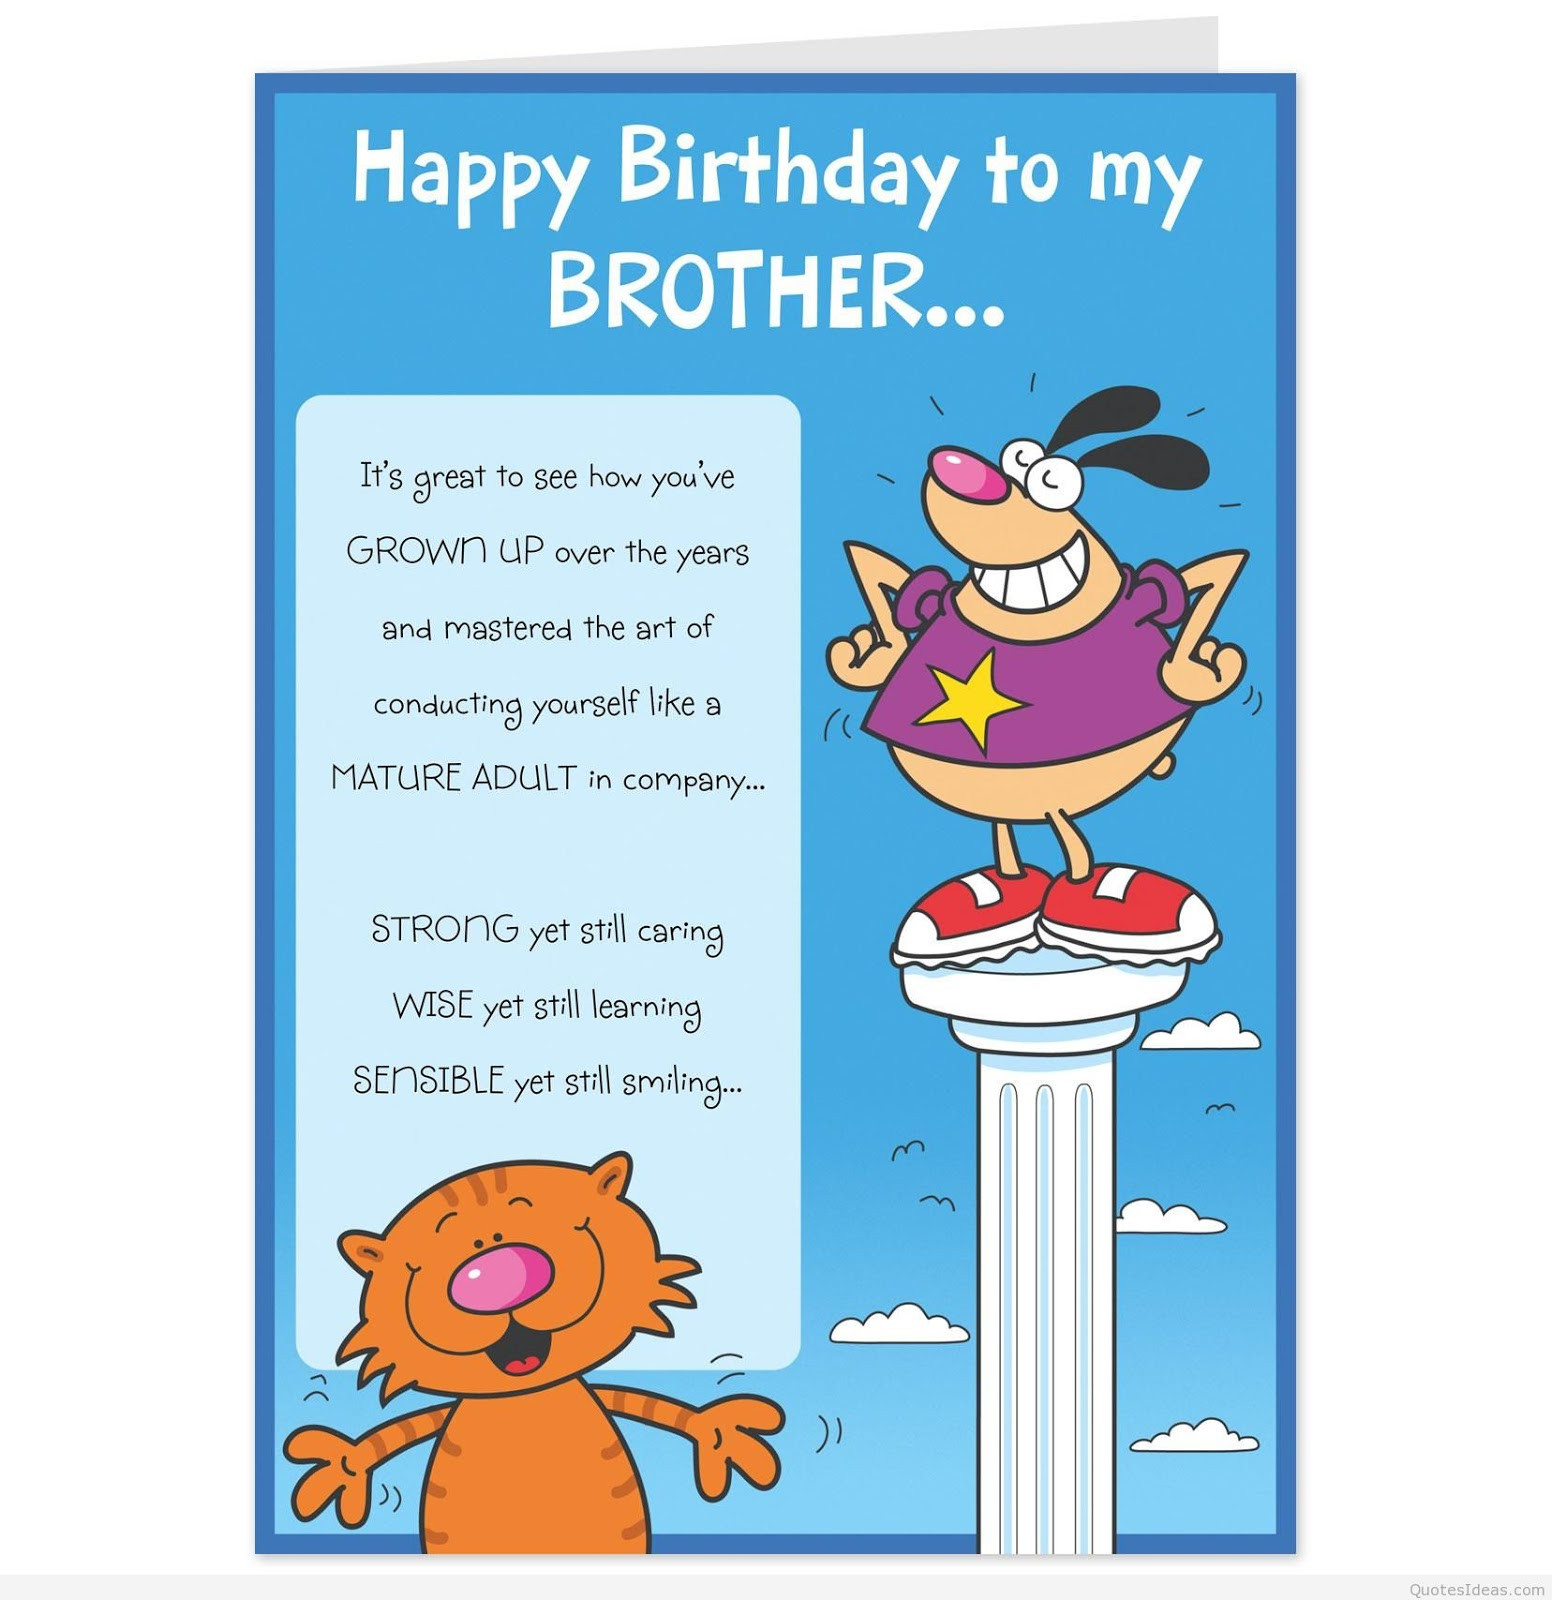 21-of-the-best-ideas-for-funny-birthday-cards-brother-home-family